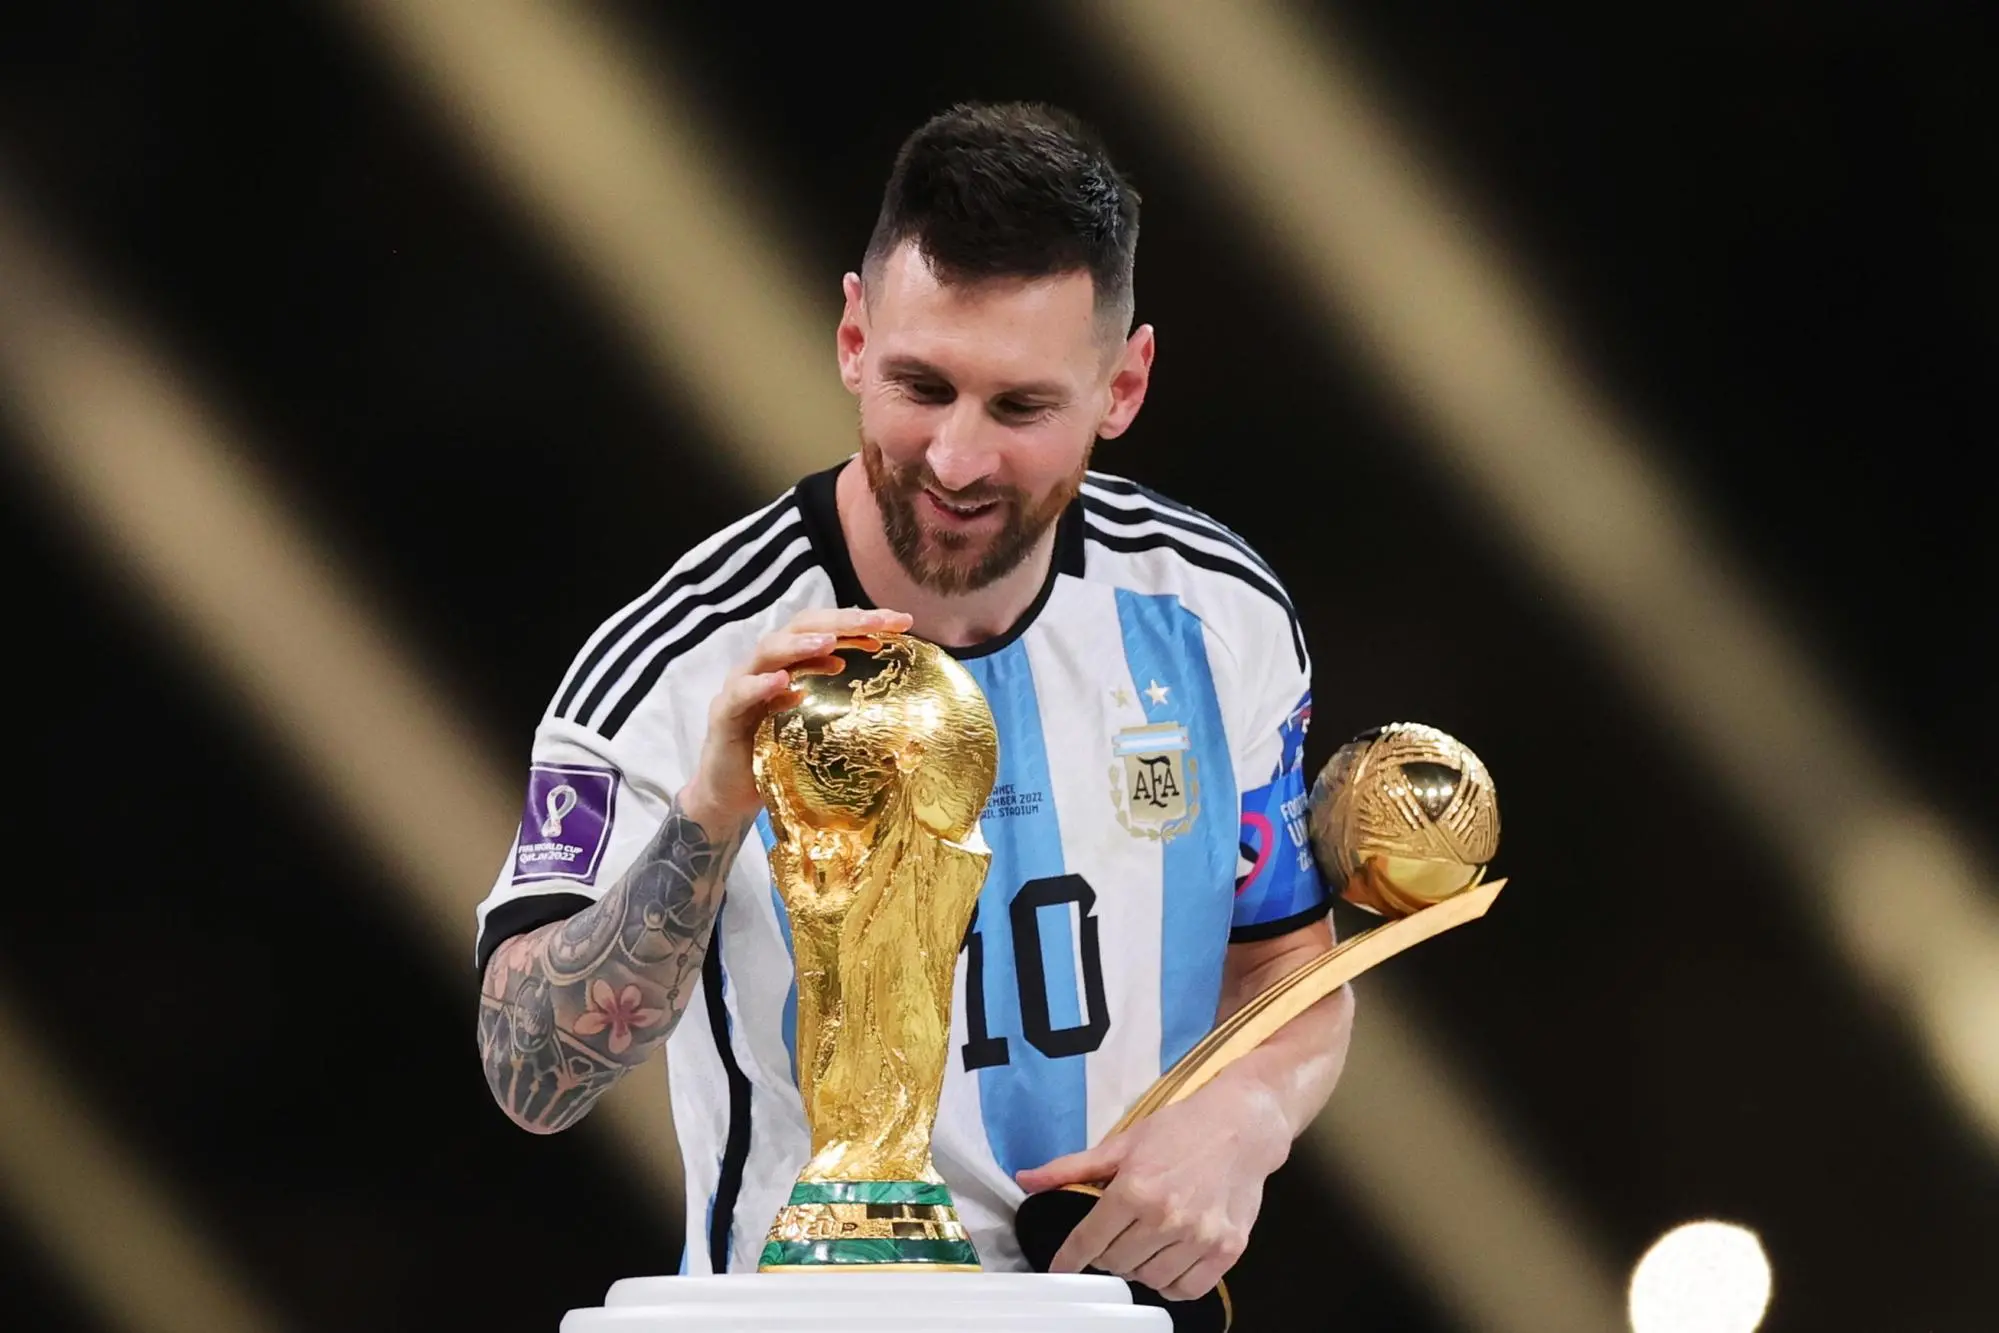 Lionel Messi of Argentina touches the World Cup trophy as he passes it after winning the golden ball award during the awards ceremony after the FIFA World Cup 2022 Final between Argentina and France at Lusail stadium, Lusail, Qatar, 18 December 2022. ANSA/Friedemann Vogel